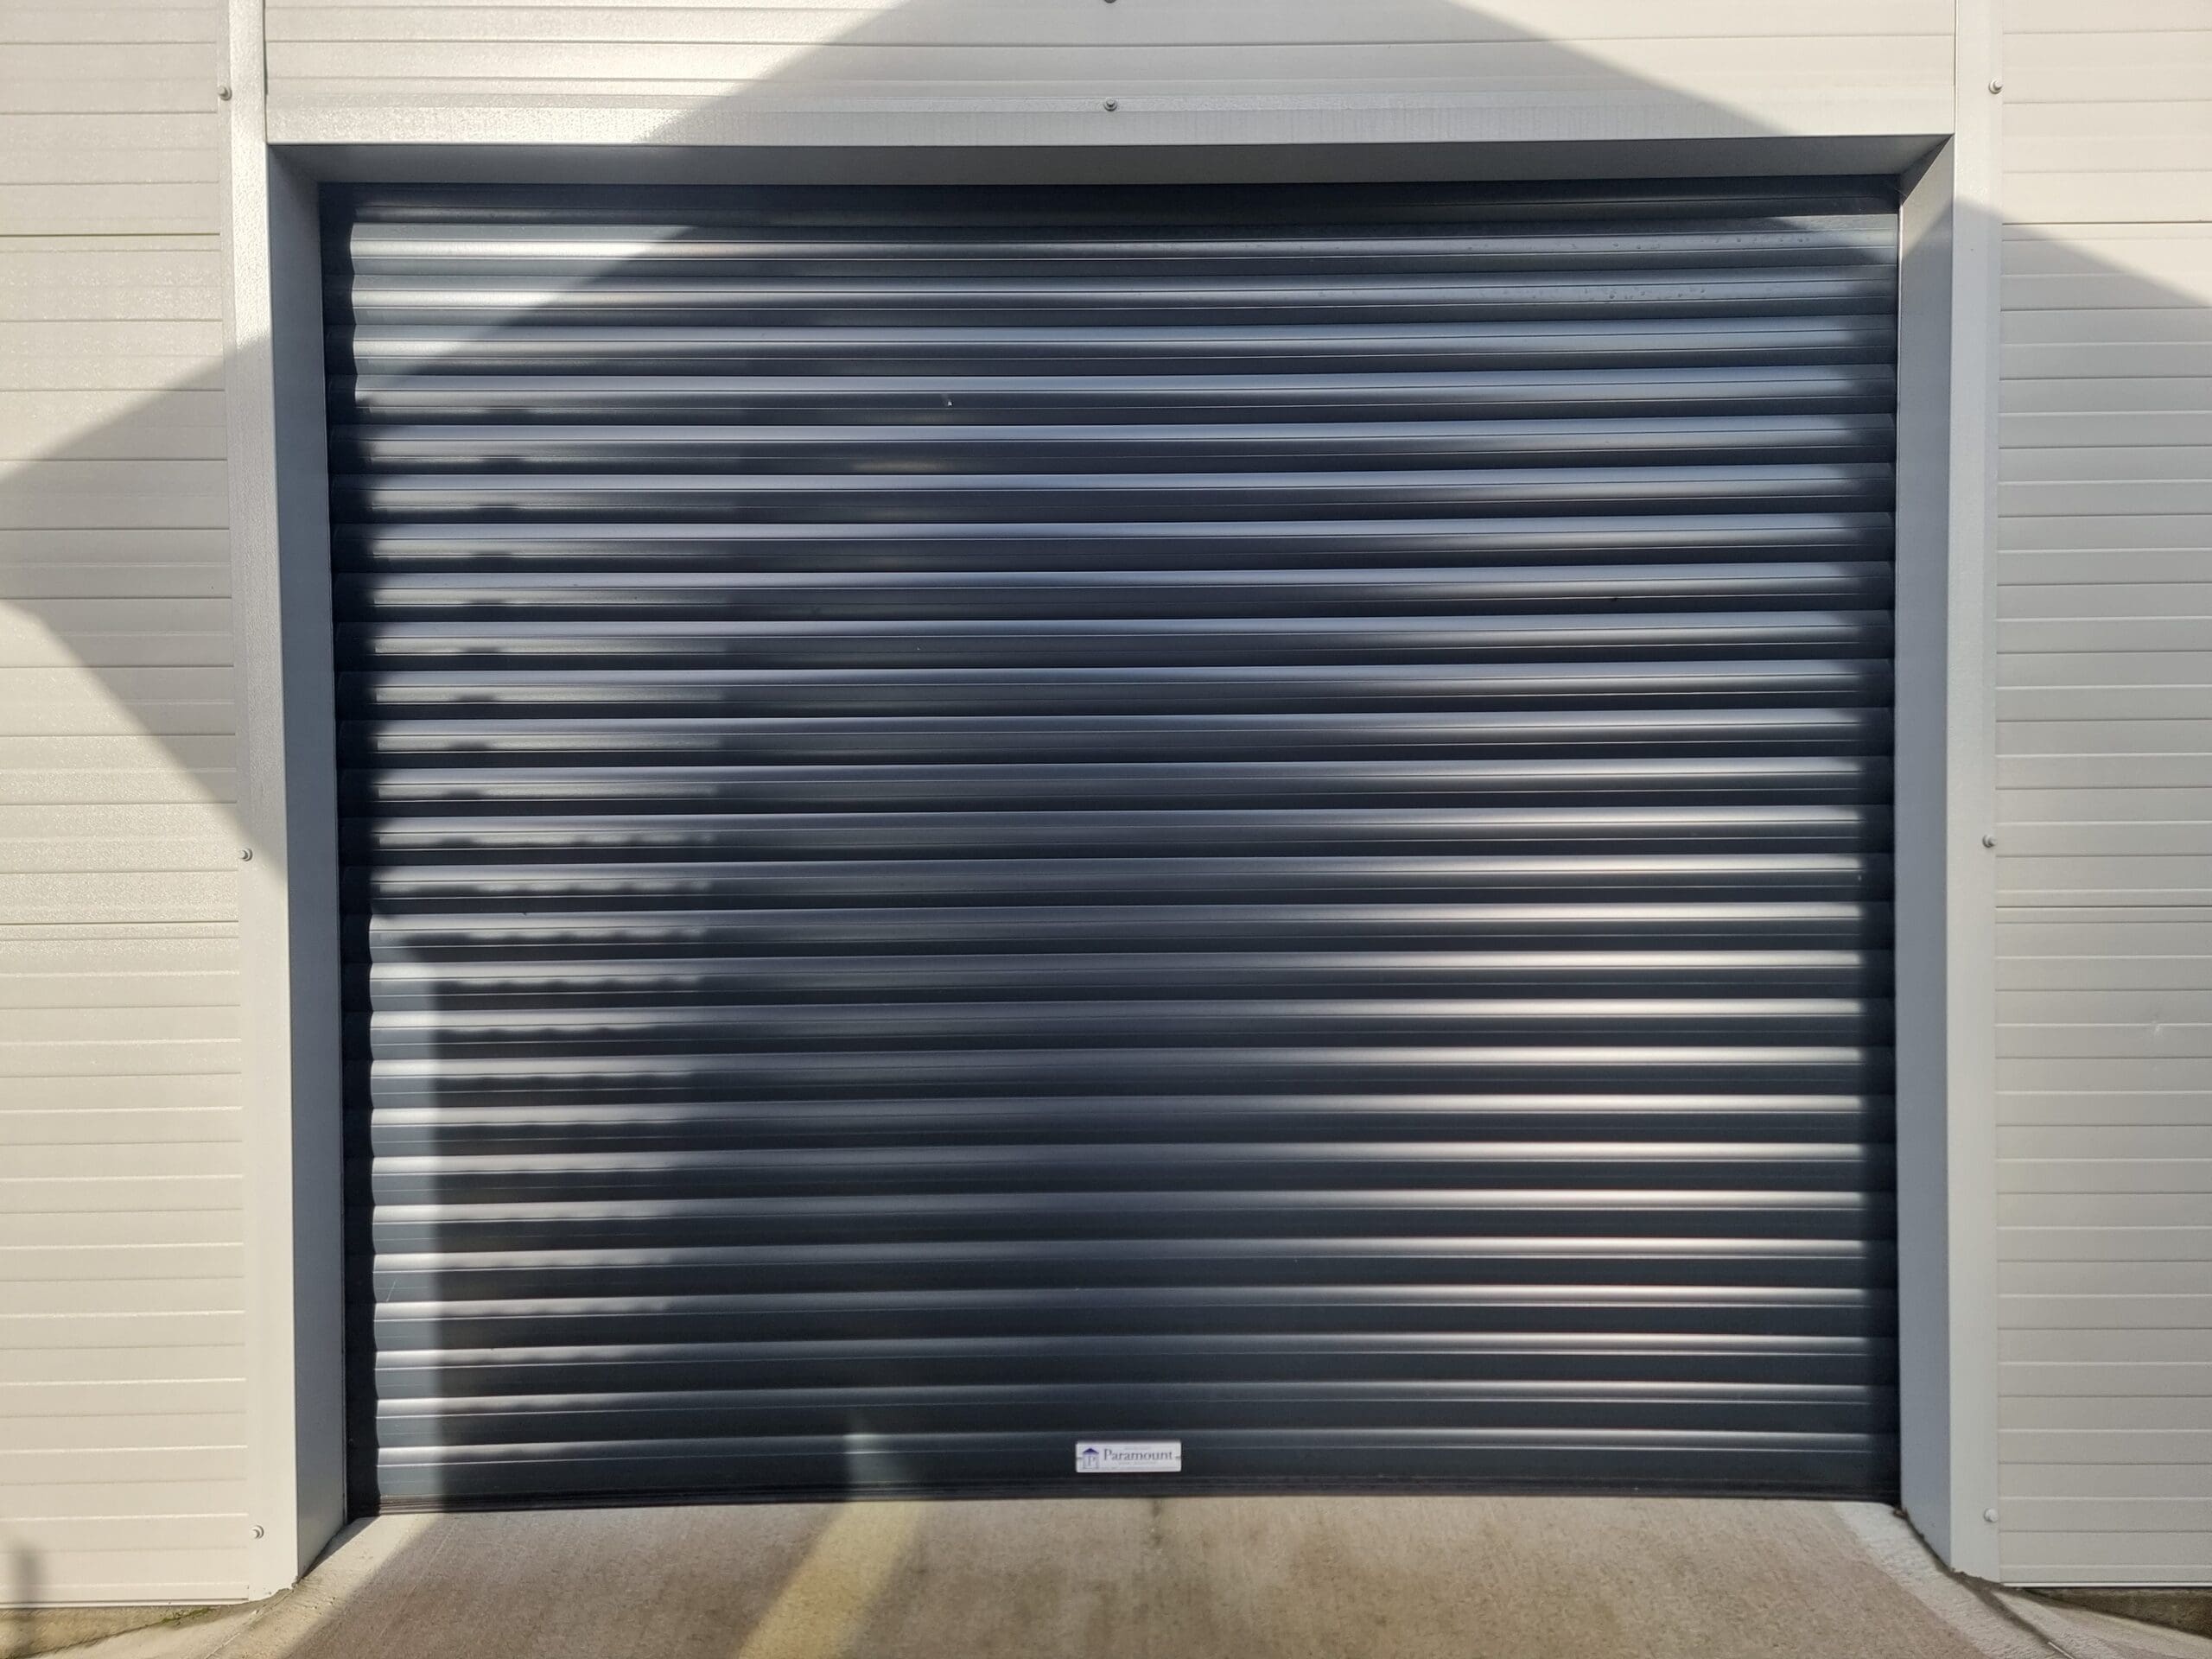 Shanette Gold Range Garage: Insulated Roller Door with Precision Engineering for Energy Efficiency and Sleek Design